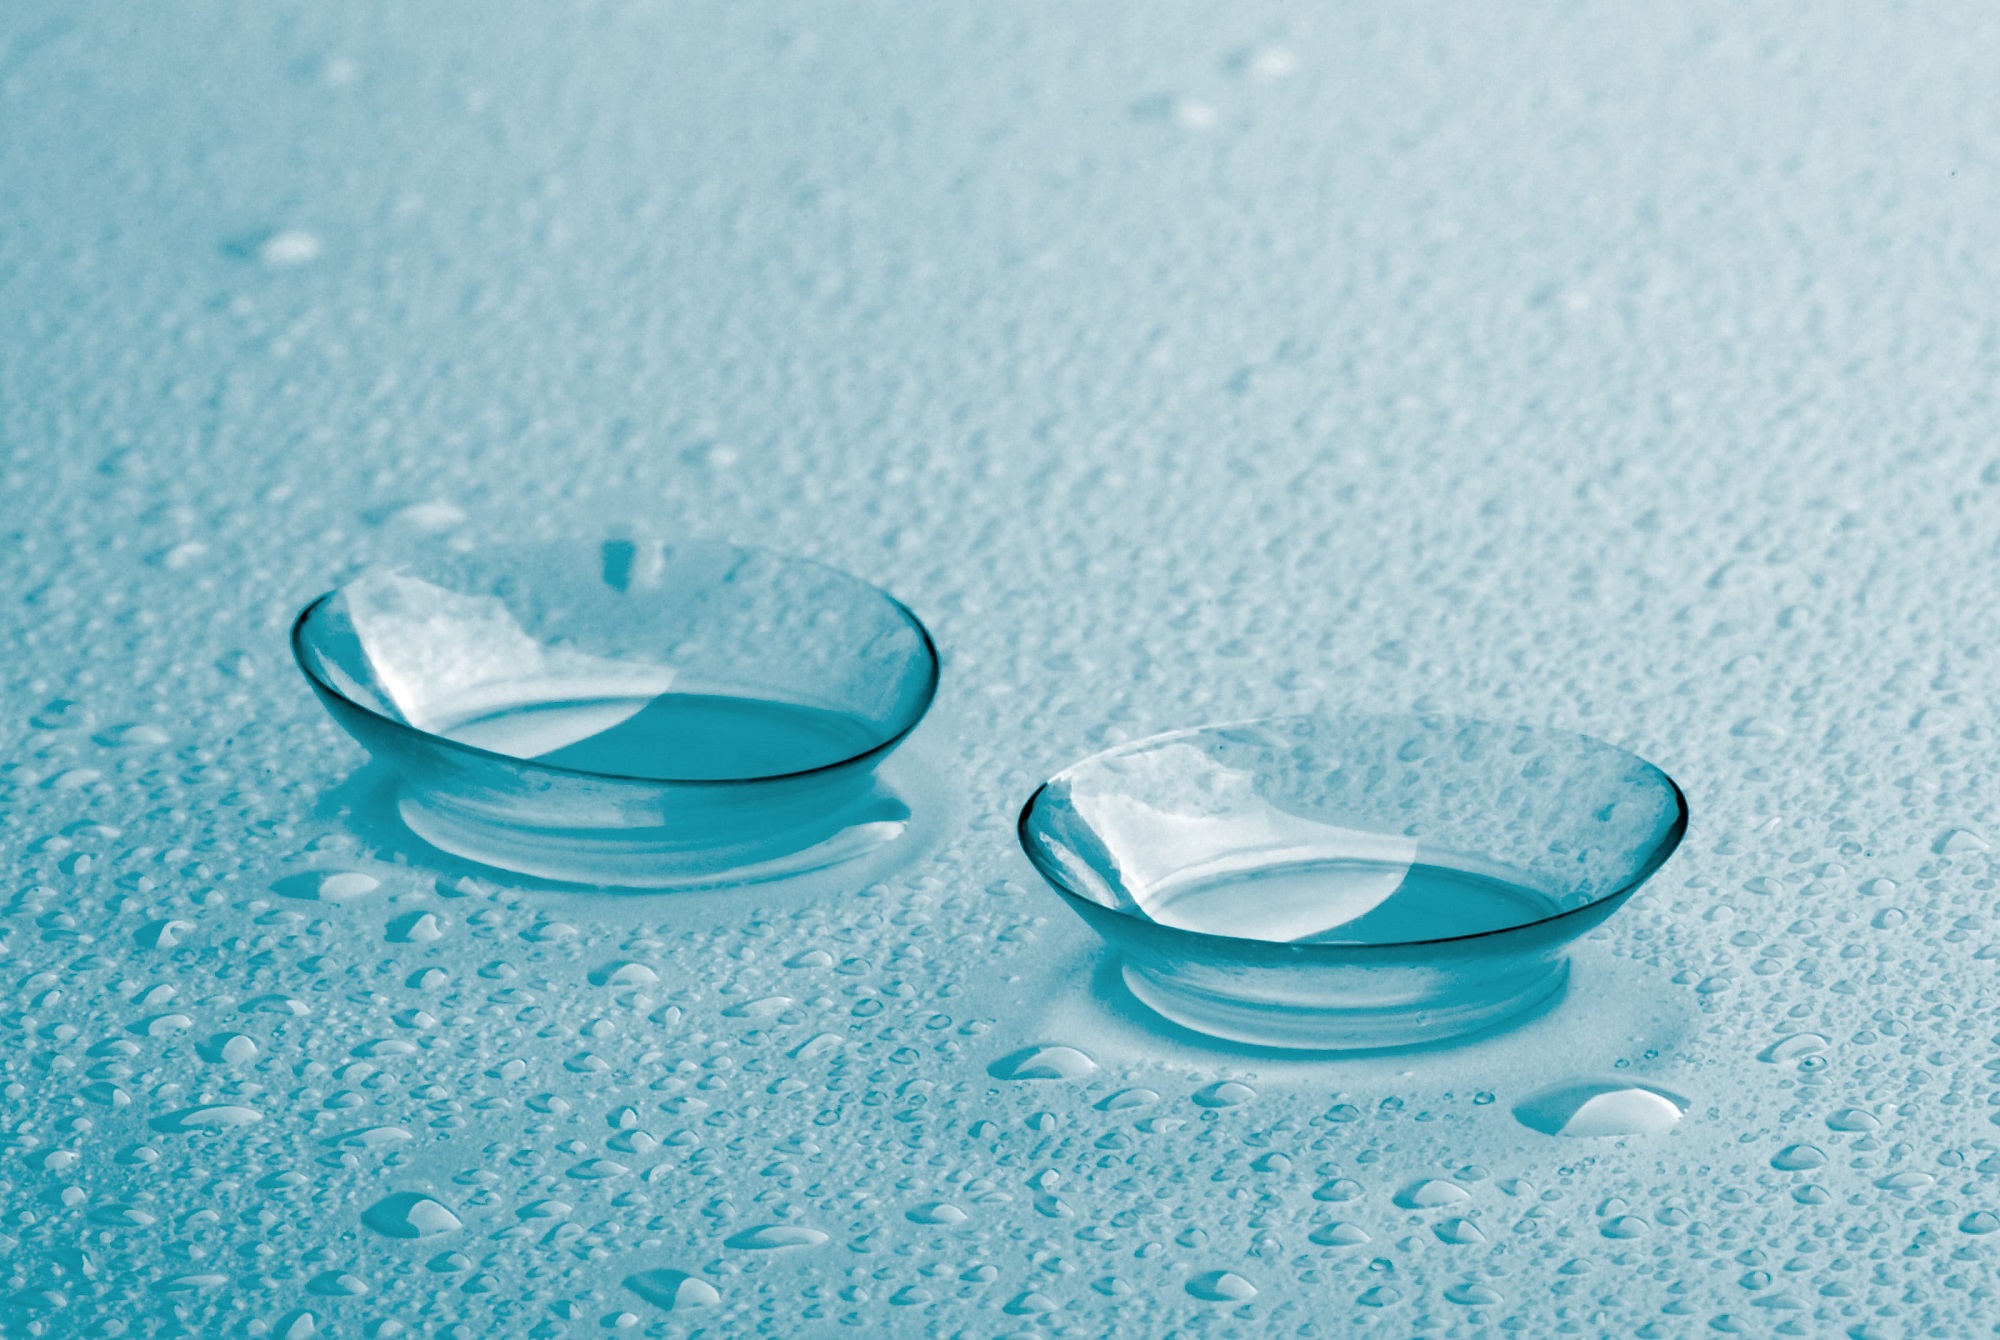 What Causes Contact Lens Discomfort?